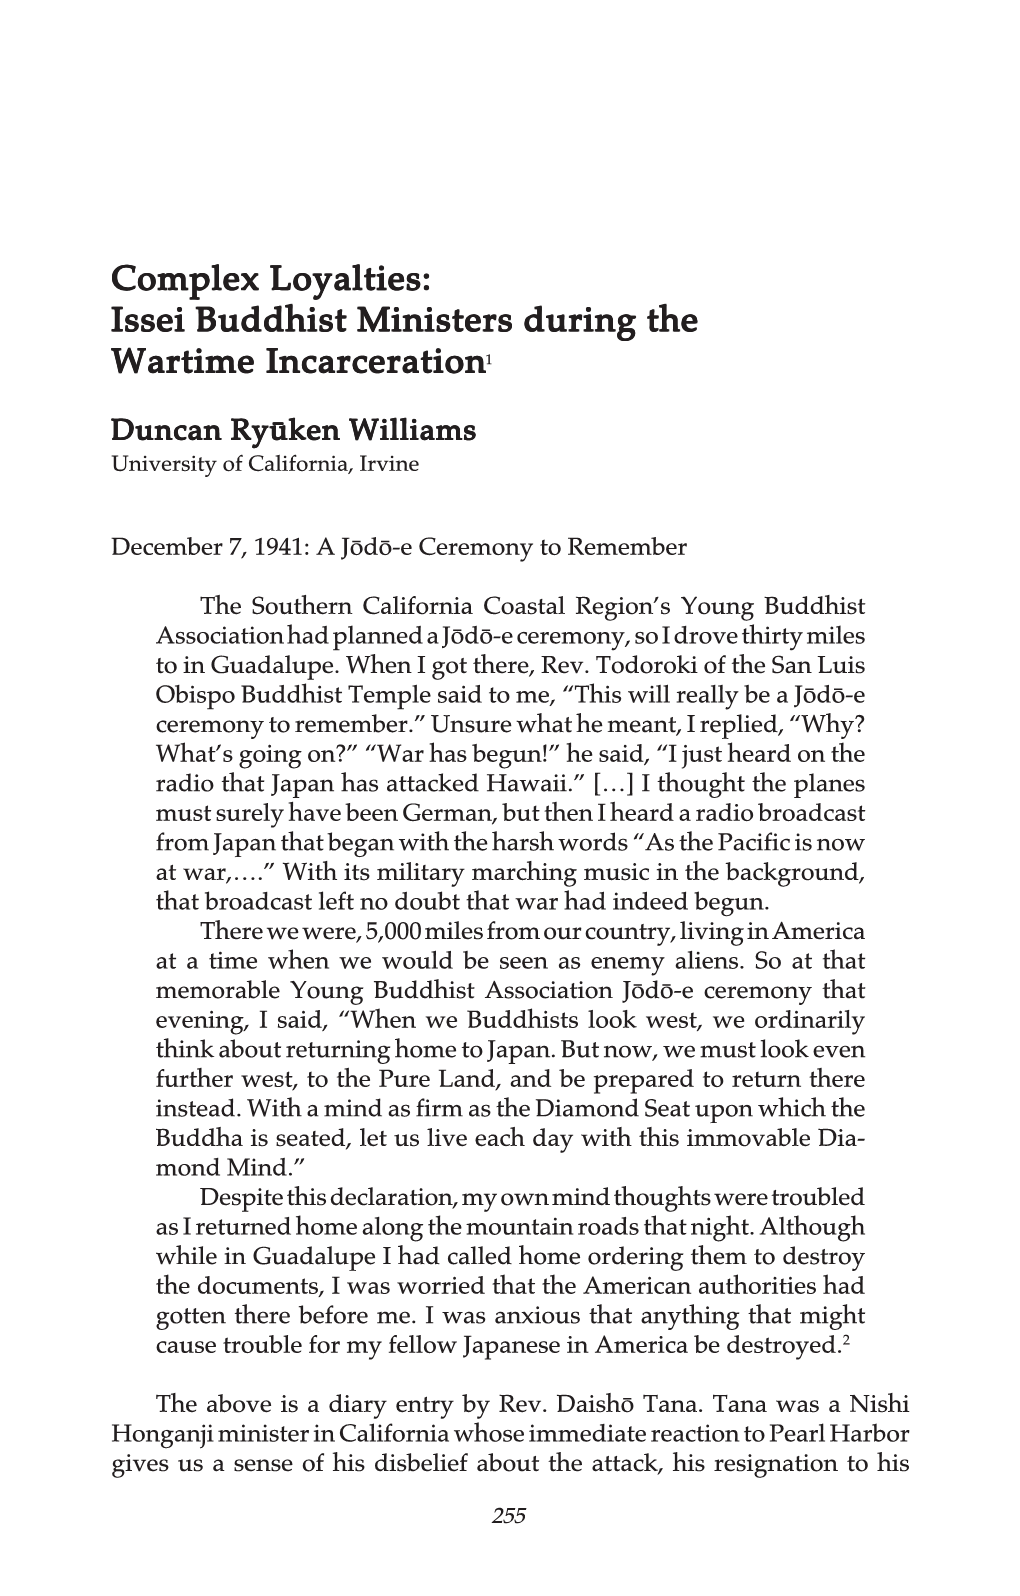 Complex Loyalties: Issei Buddhist Ministers During the Wartime Incarceration1